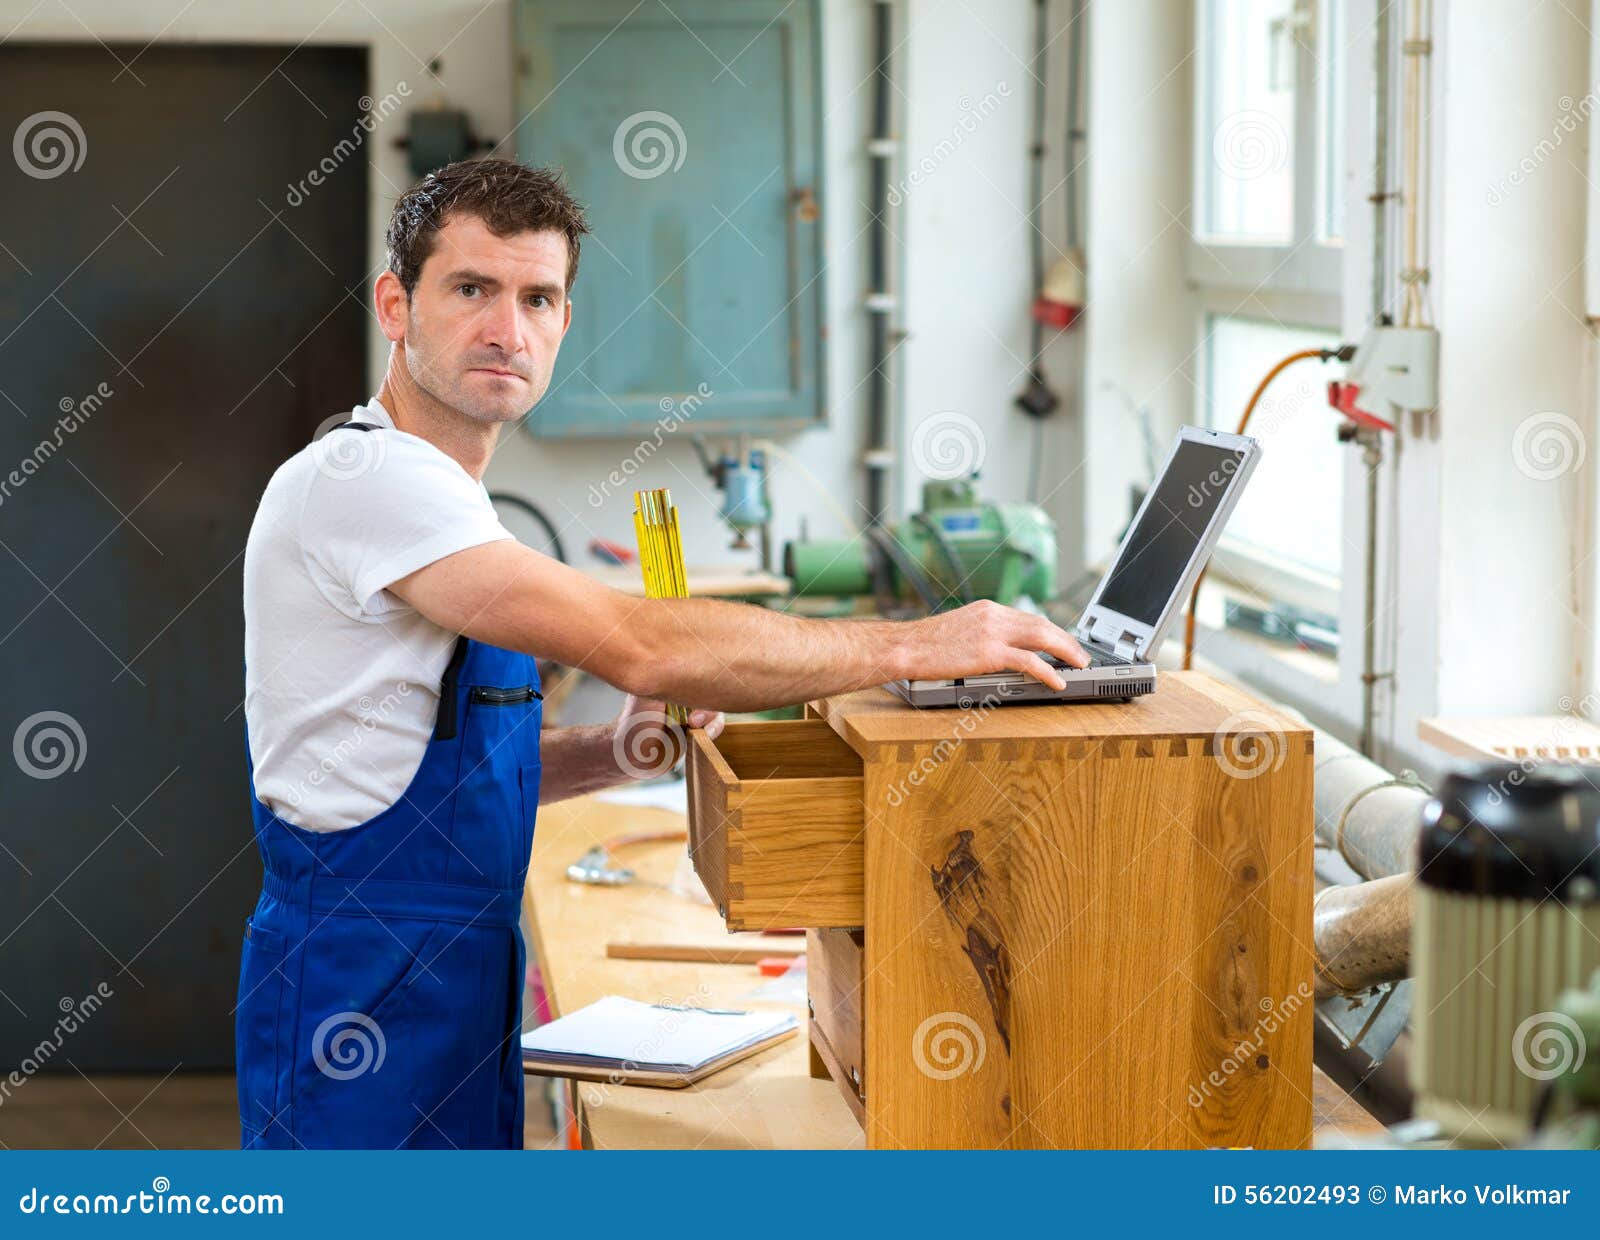 Worker In A Carpenter S Workshop With Computer Stock Image Image